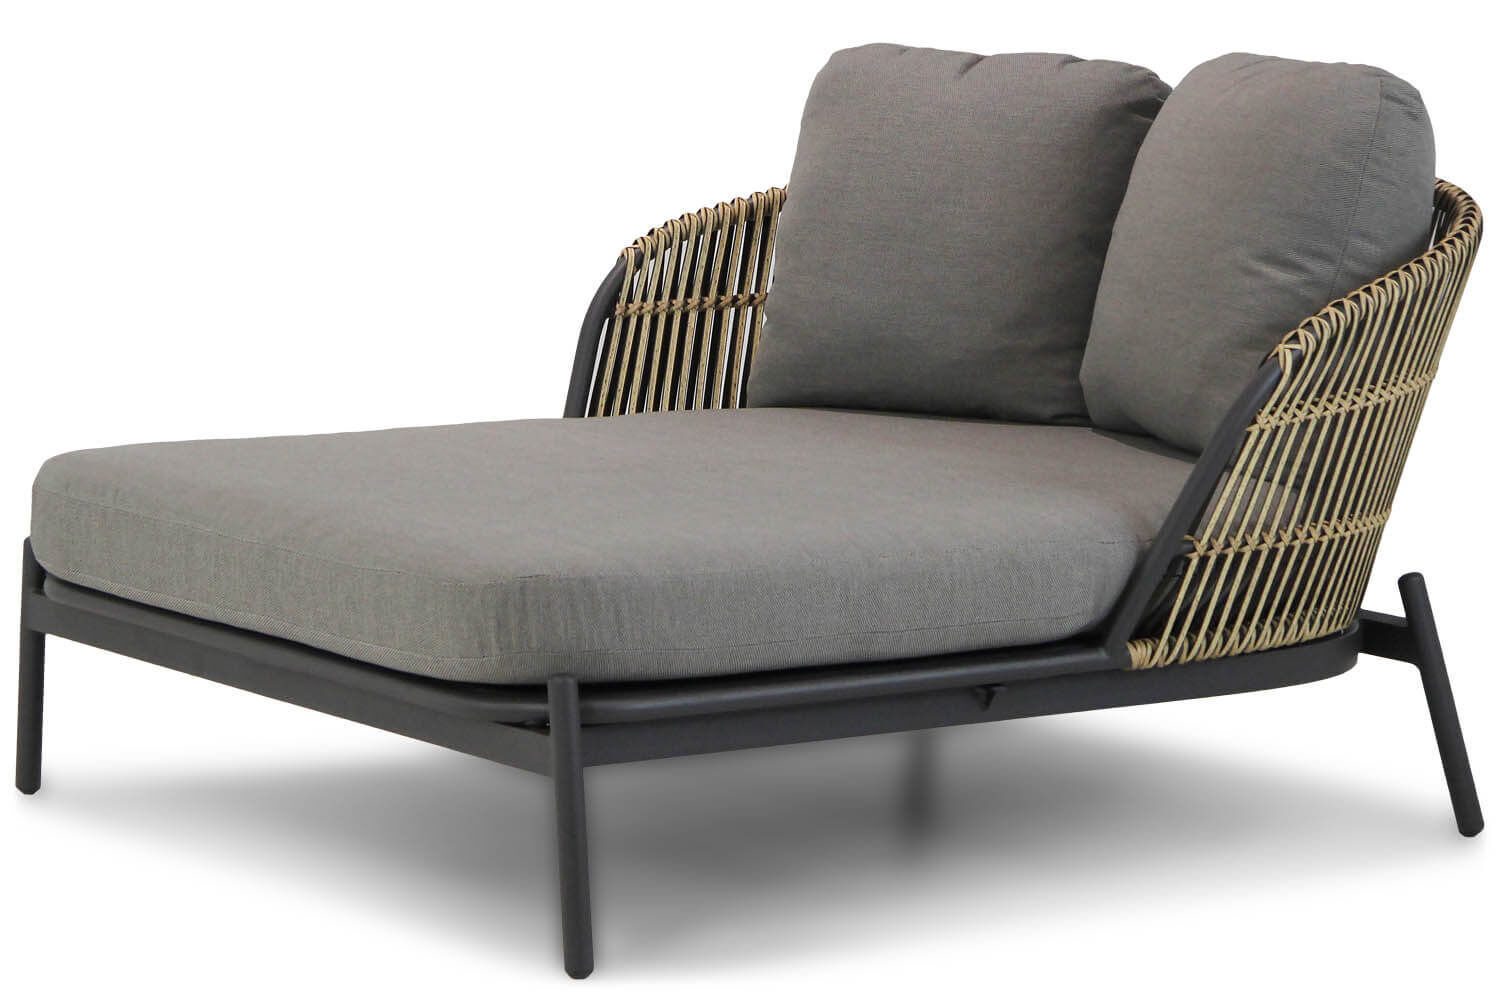 Coco Nathan daybed